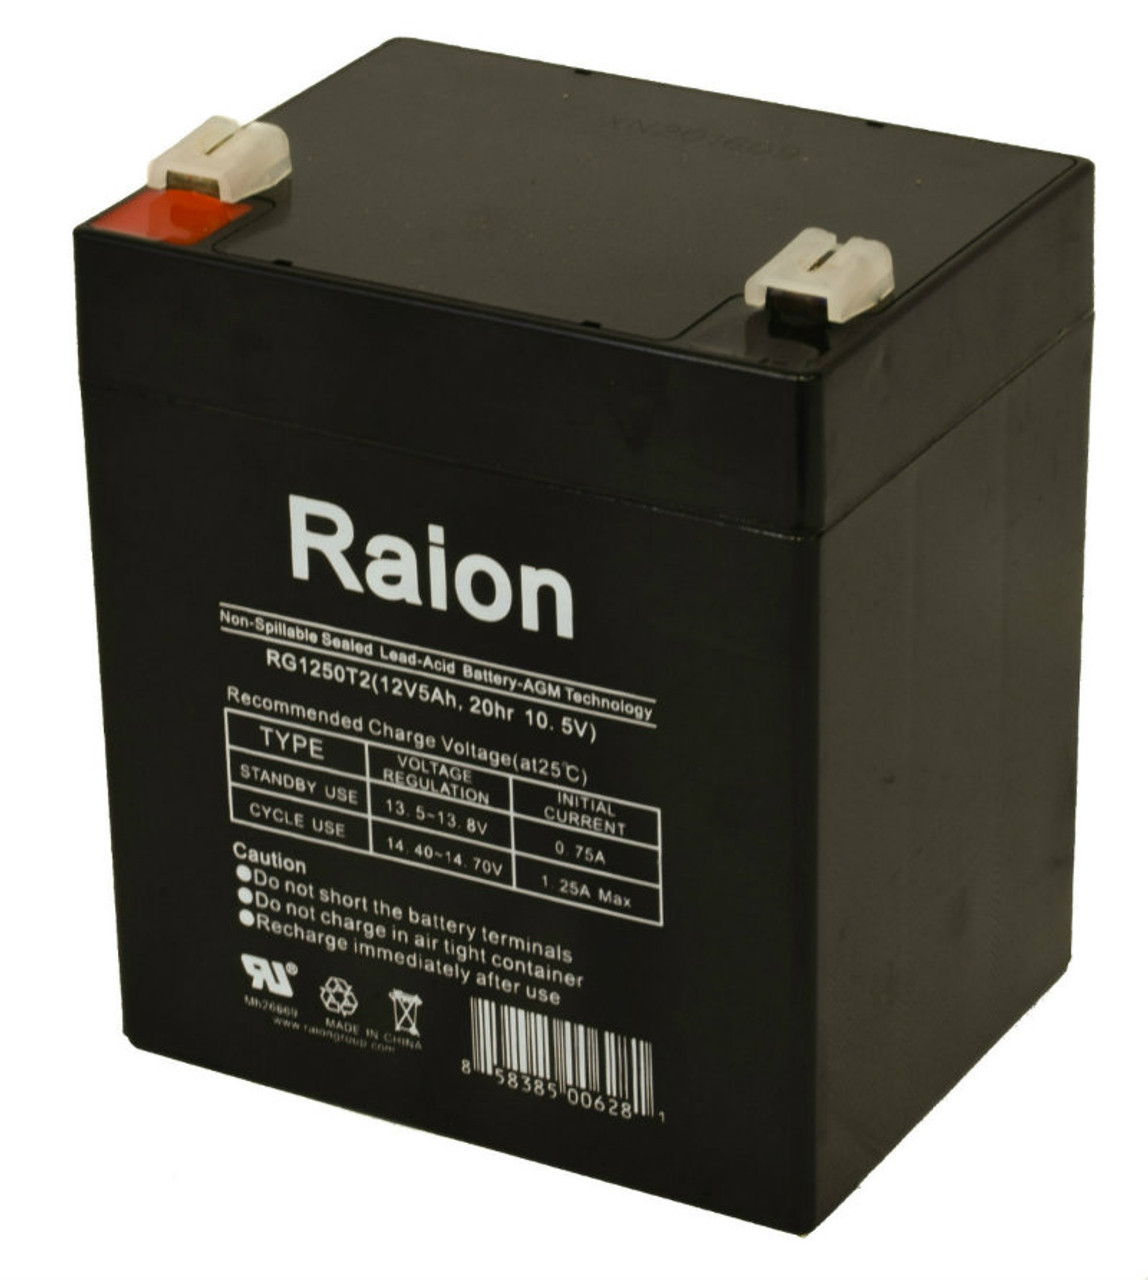 Raion Power RG1250T1 Replacement Battery for Remco RM12-5 F1